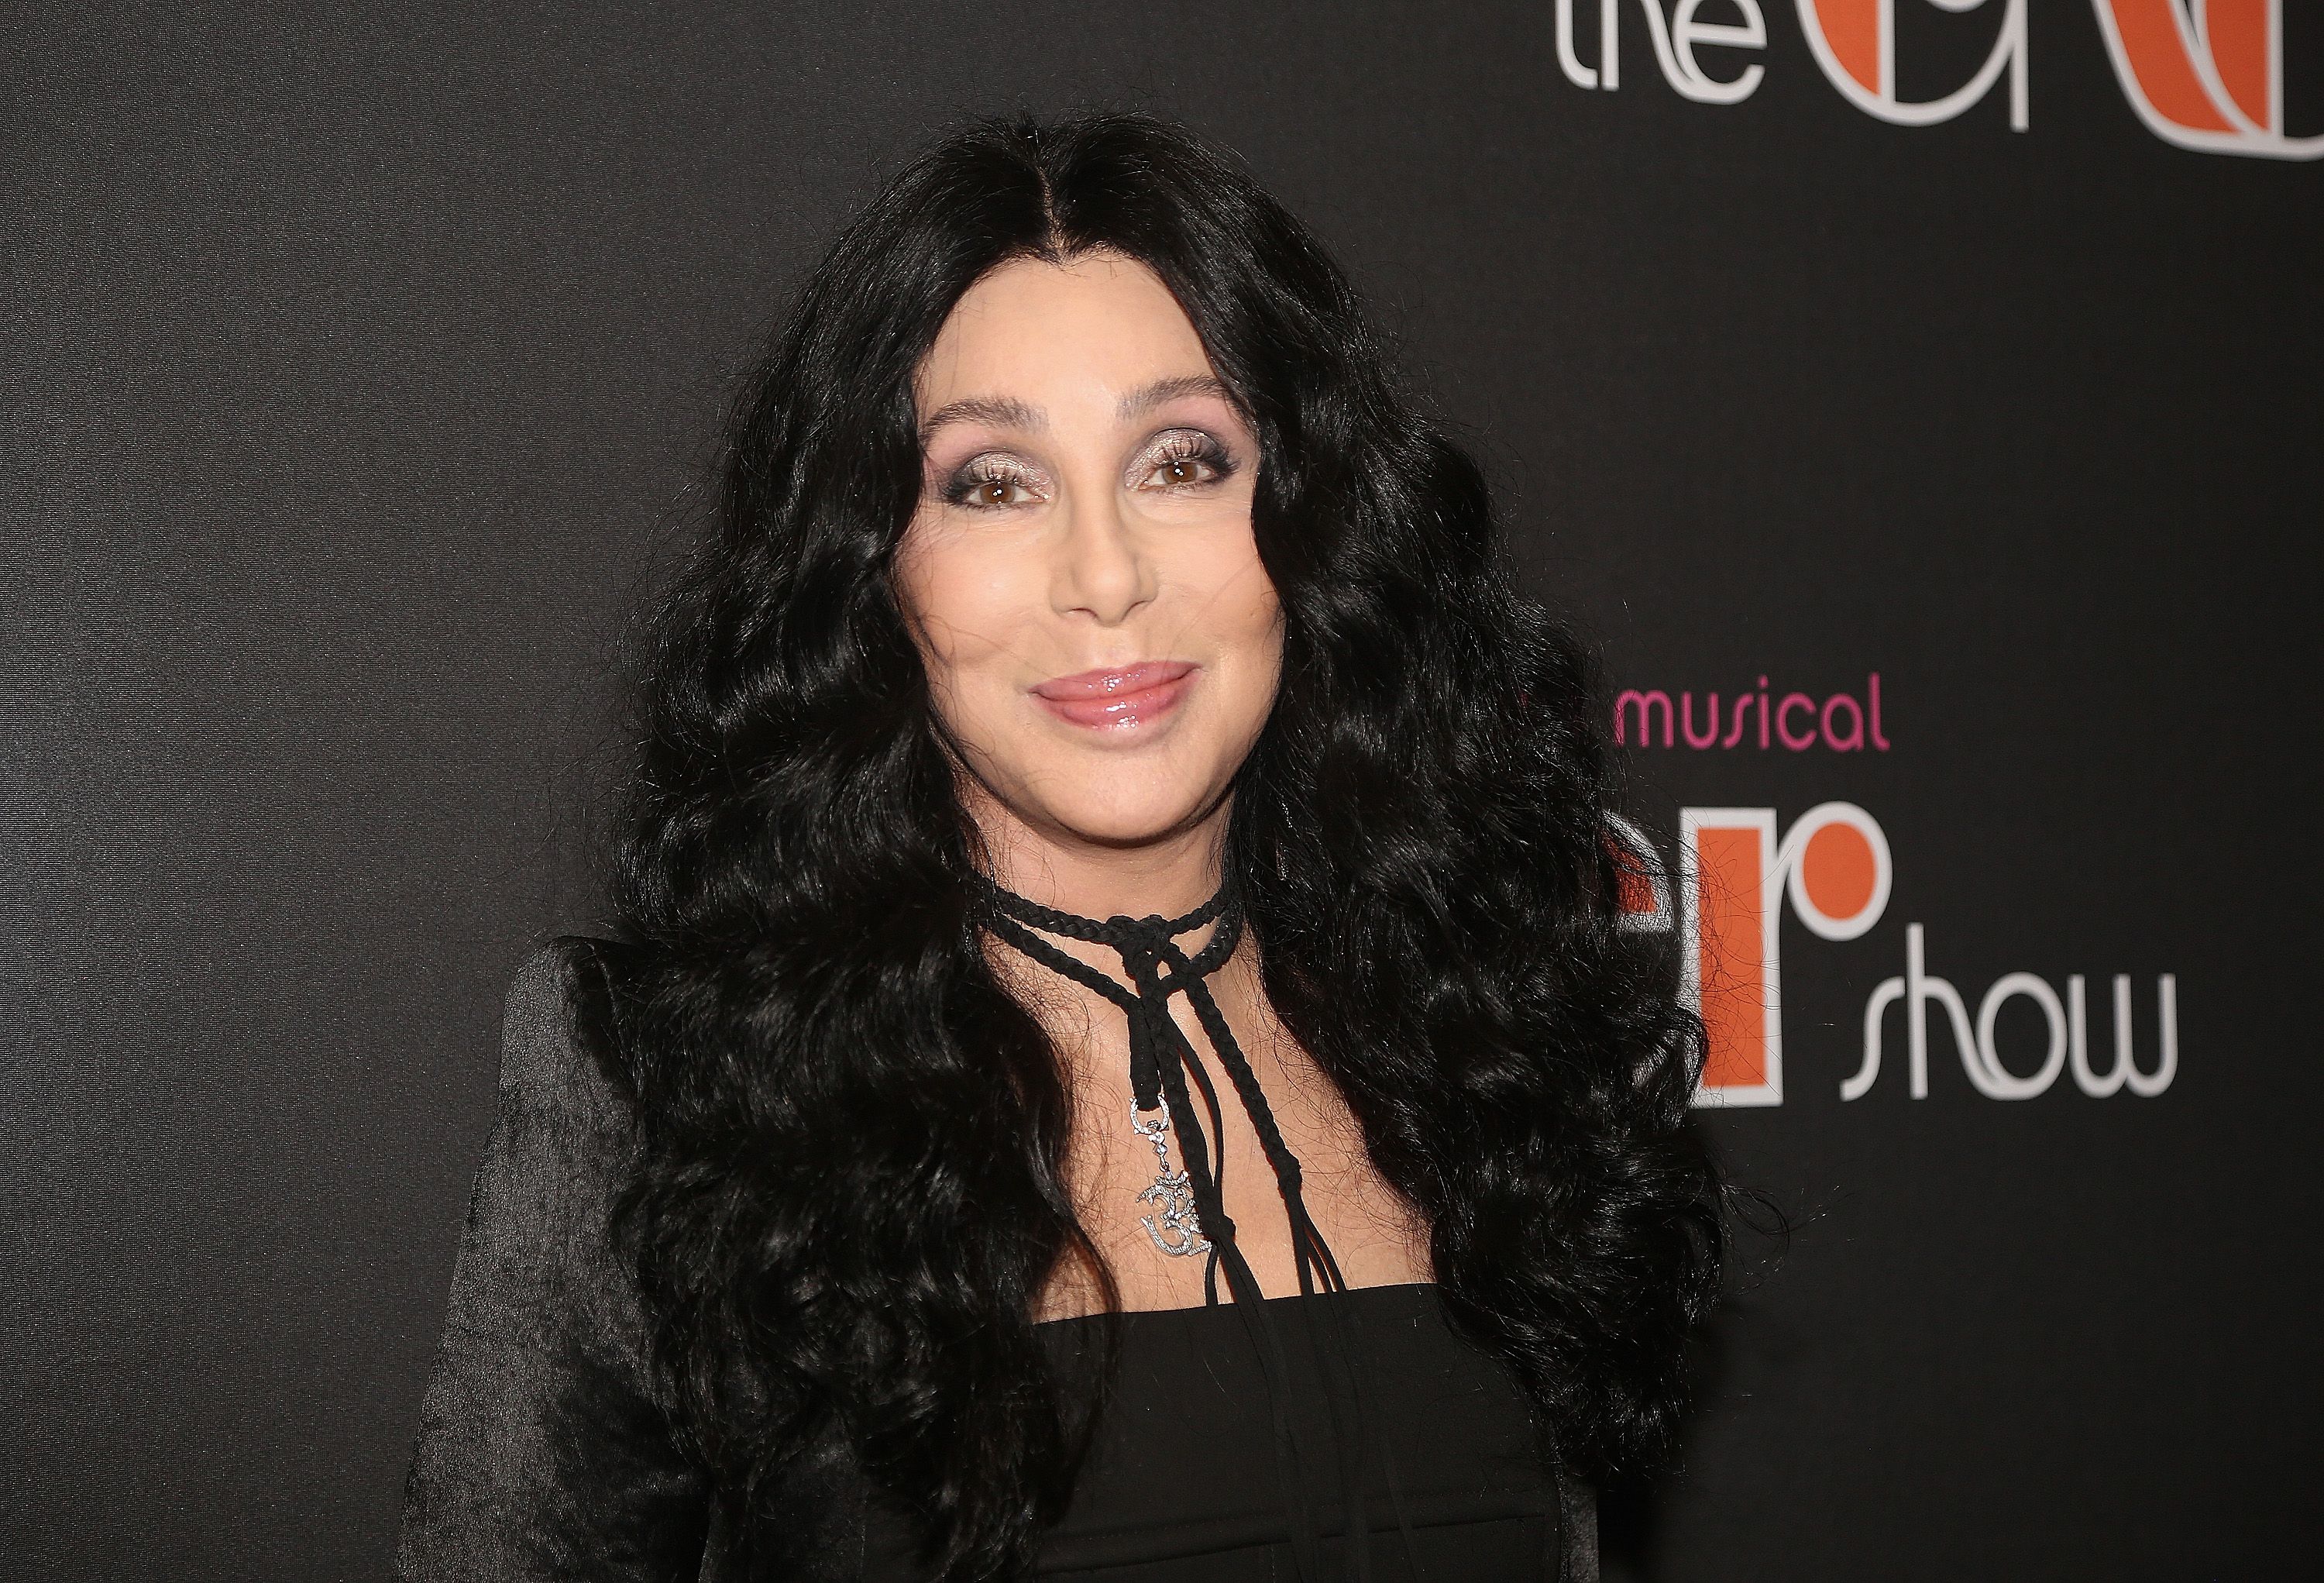 cher twitter apology